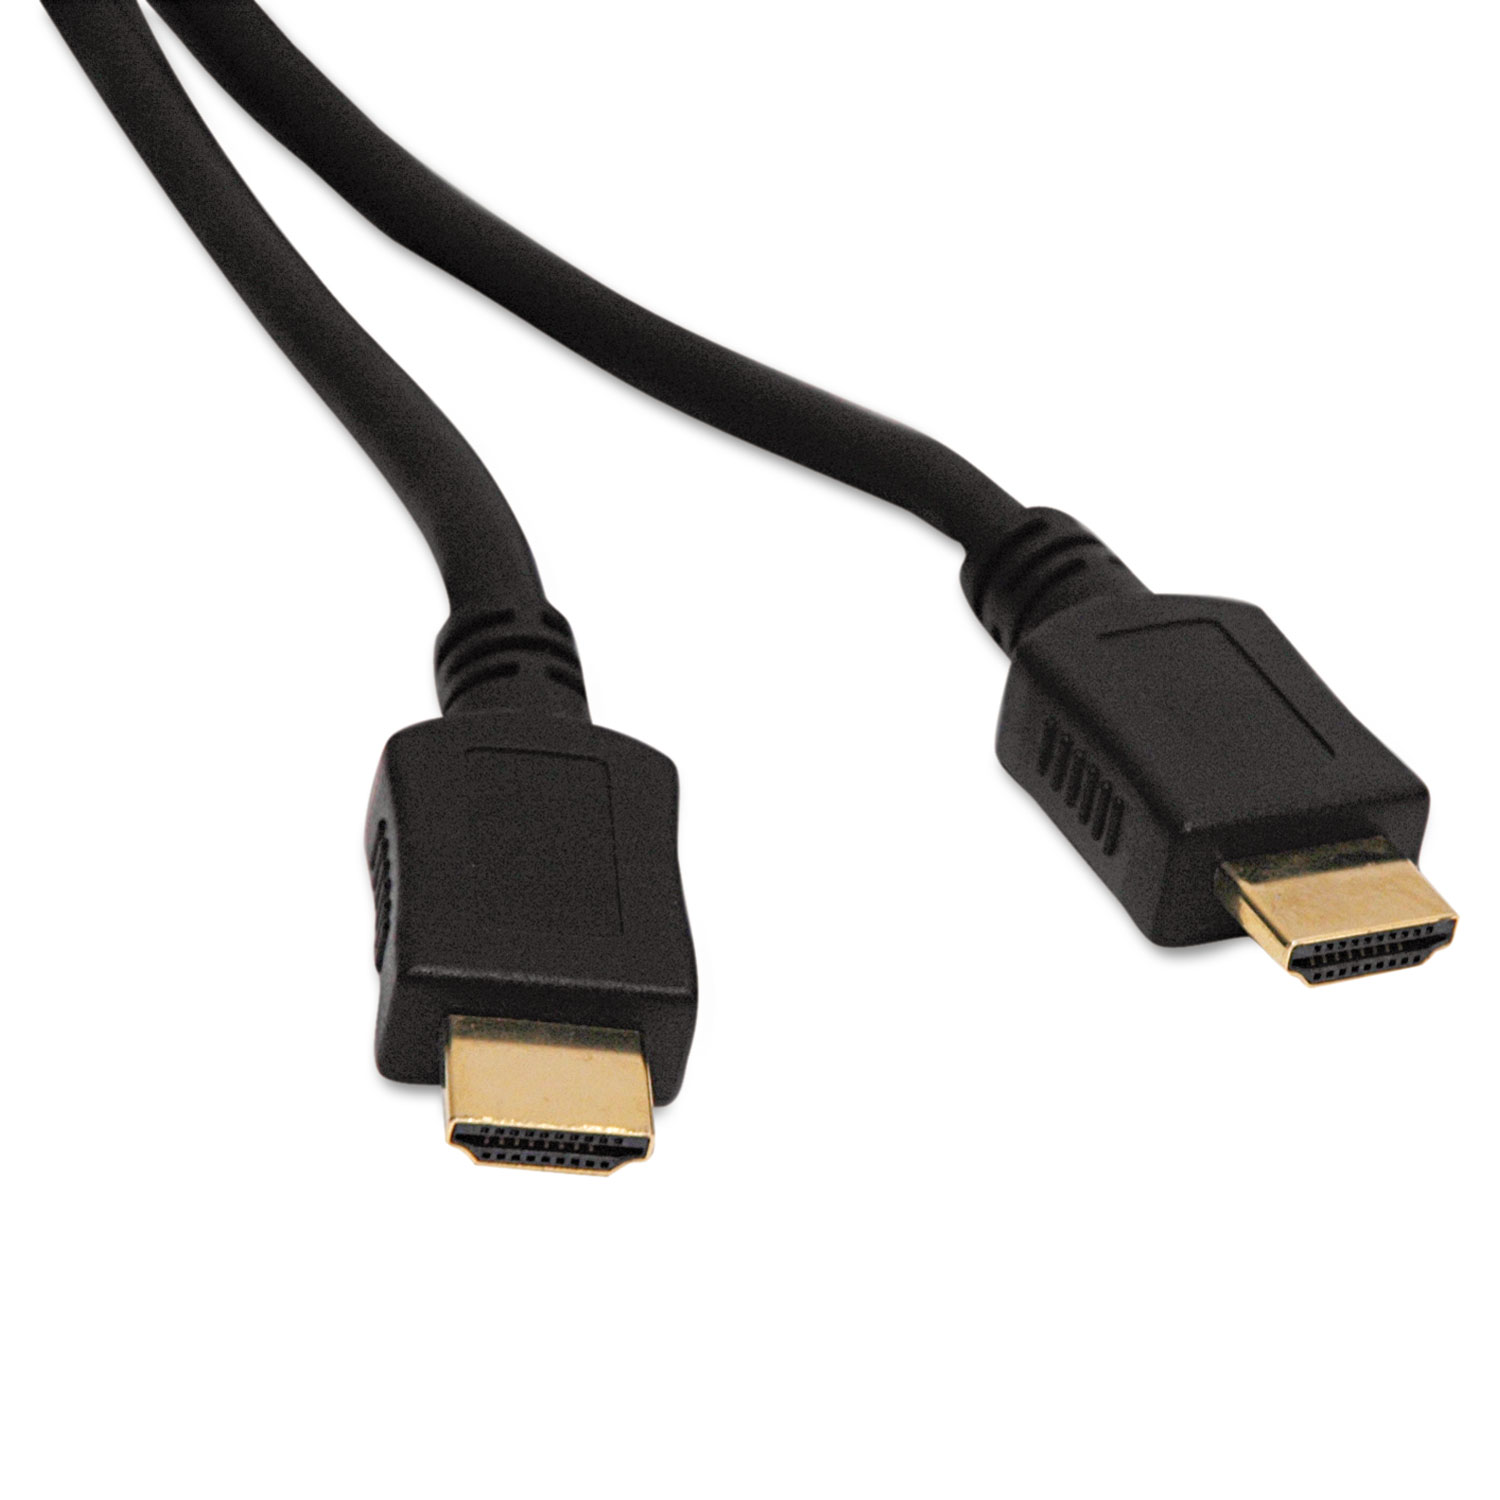  Tripp Lite P568-050 Standard Speed HDMI Cable, 1080P, Digital Video with Audio (M/M), 50 ft. (TRPP568050) 